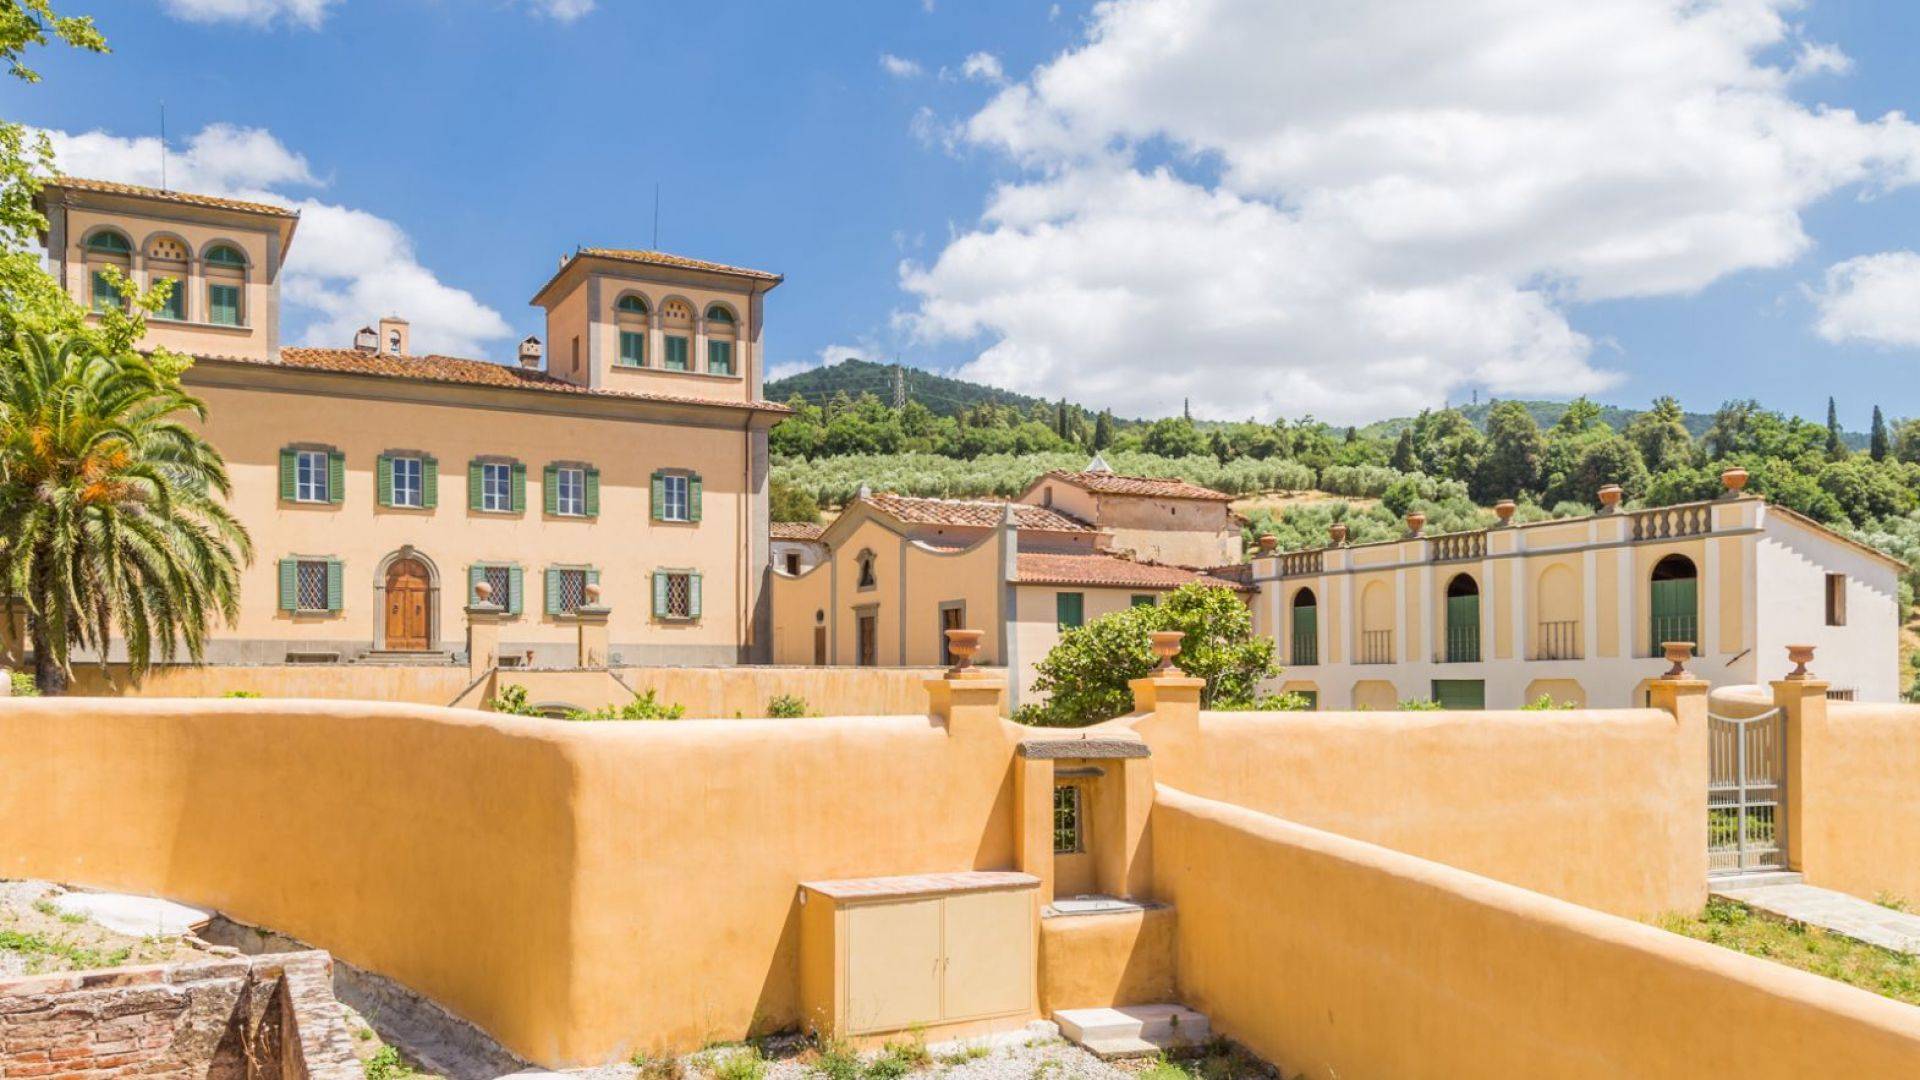 Splendid ancient noble residence, for sale a few kilometers from Florence.